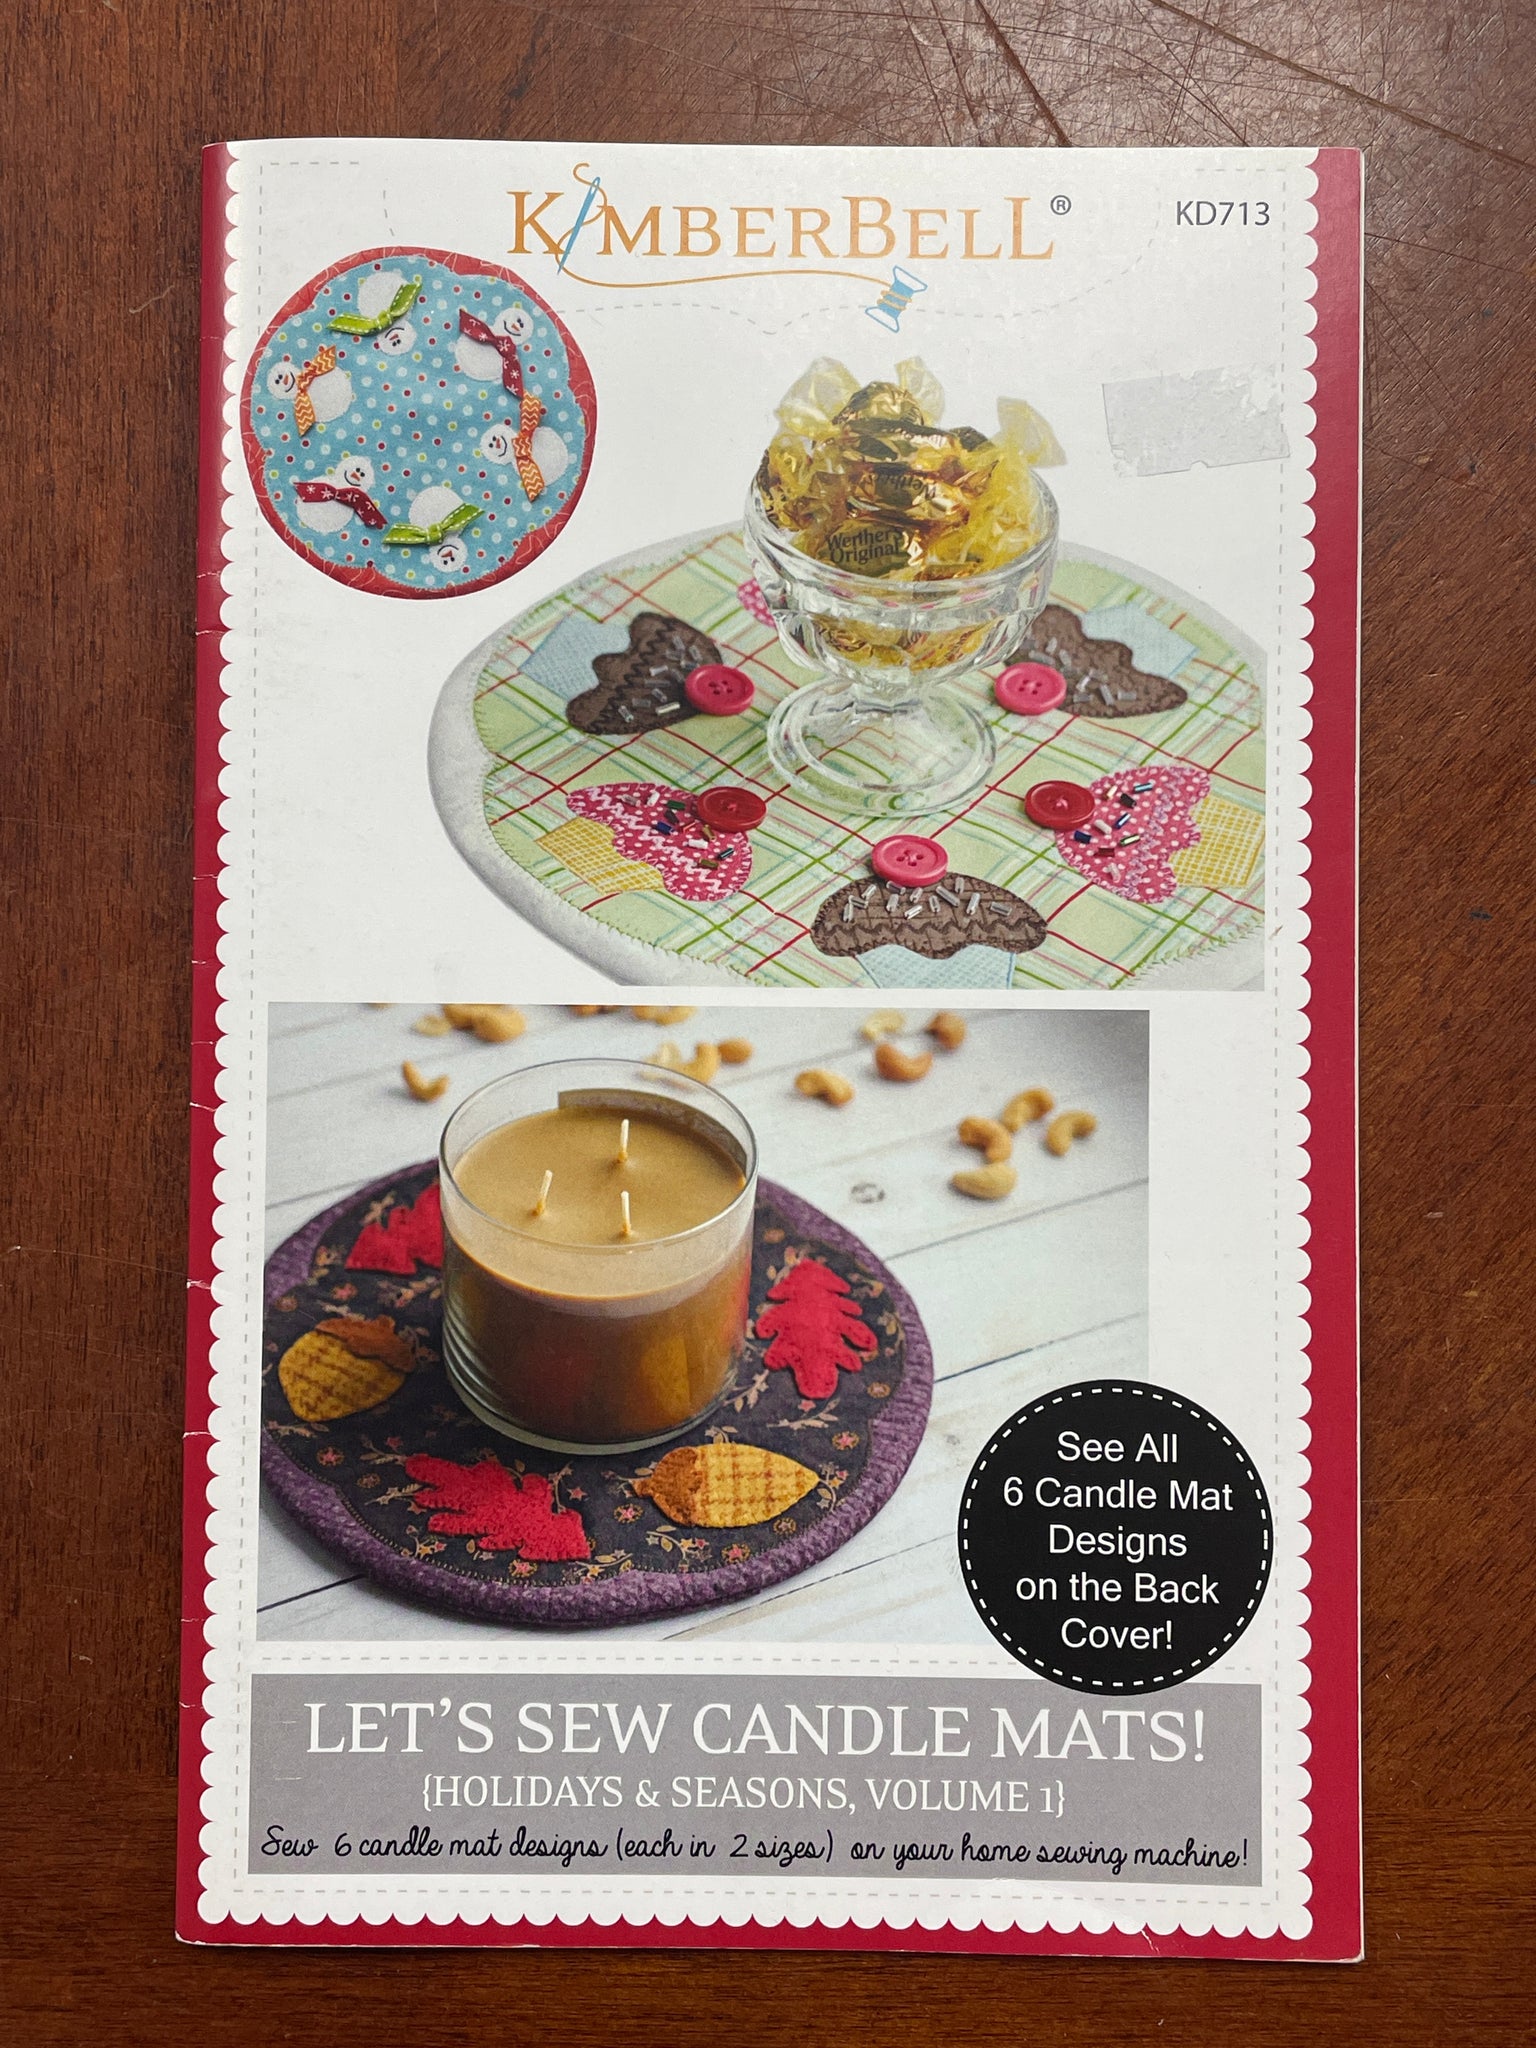 2017 Quilting Book - "Let's Sew Candle Mats!"